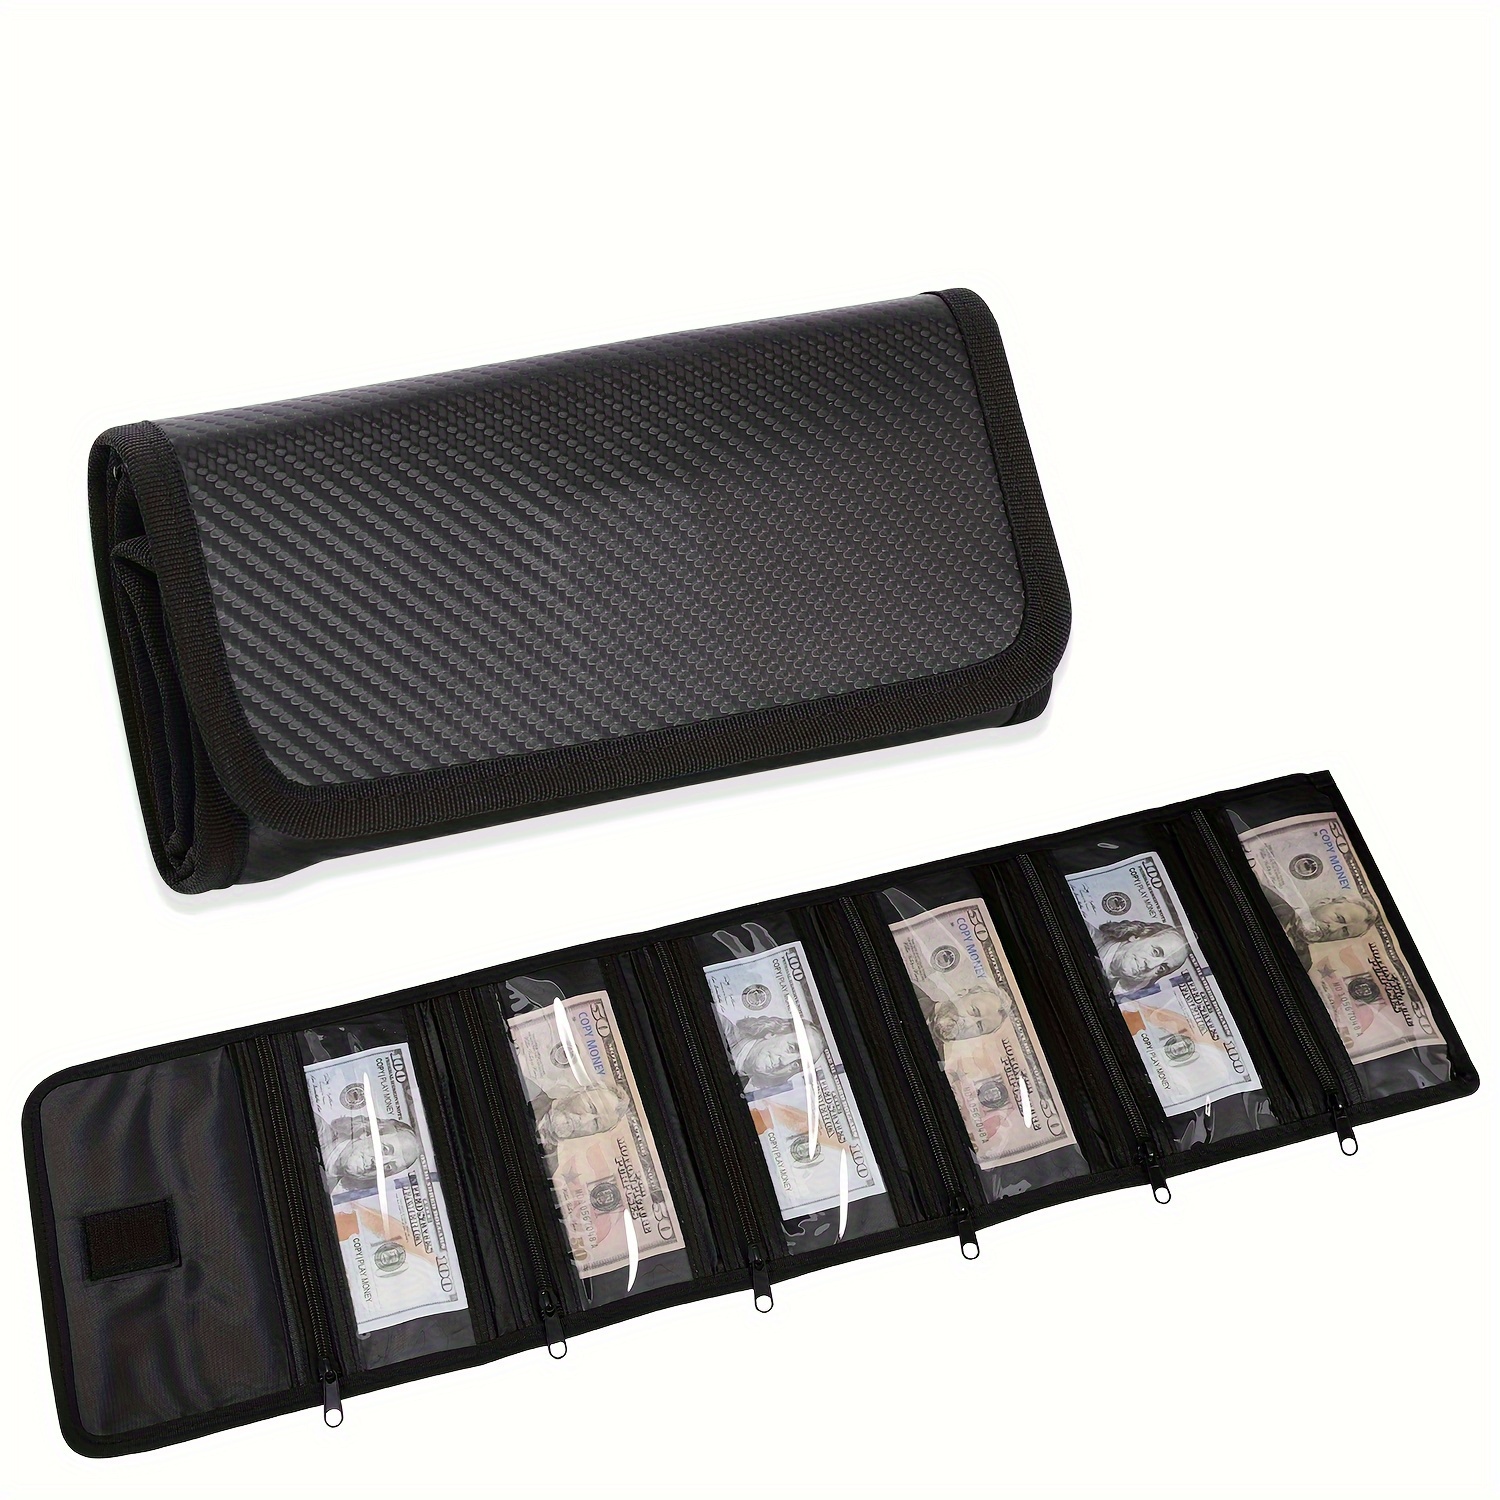 Money Wallet Money Organizer For Cash With 6 Zippered Pocket Multipack Money  Pouch Cash Bill Organizer Envelope Wallet Money Bag Small Travel Money  Holder For Budgeting Receipt And Tips